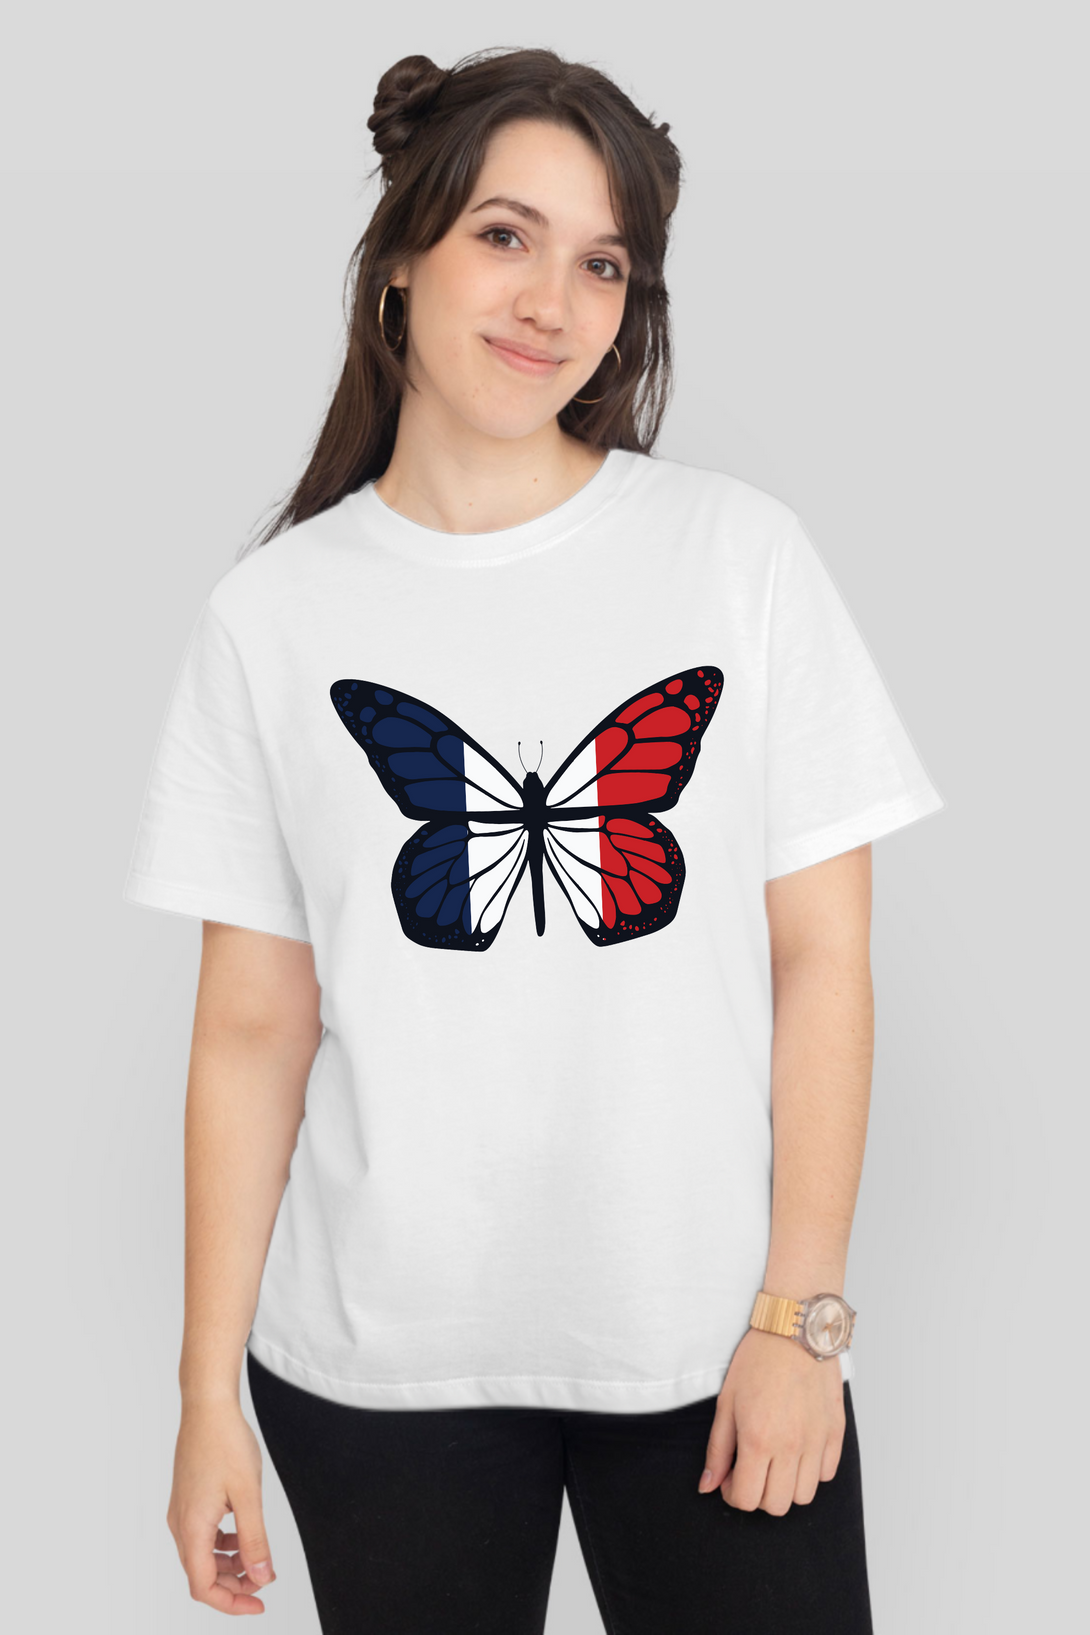 French Butterfly Printed T-Shirt For Women - WowWaves - 8